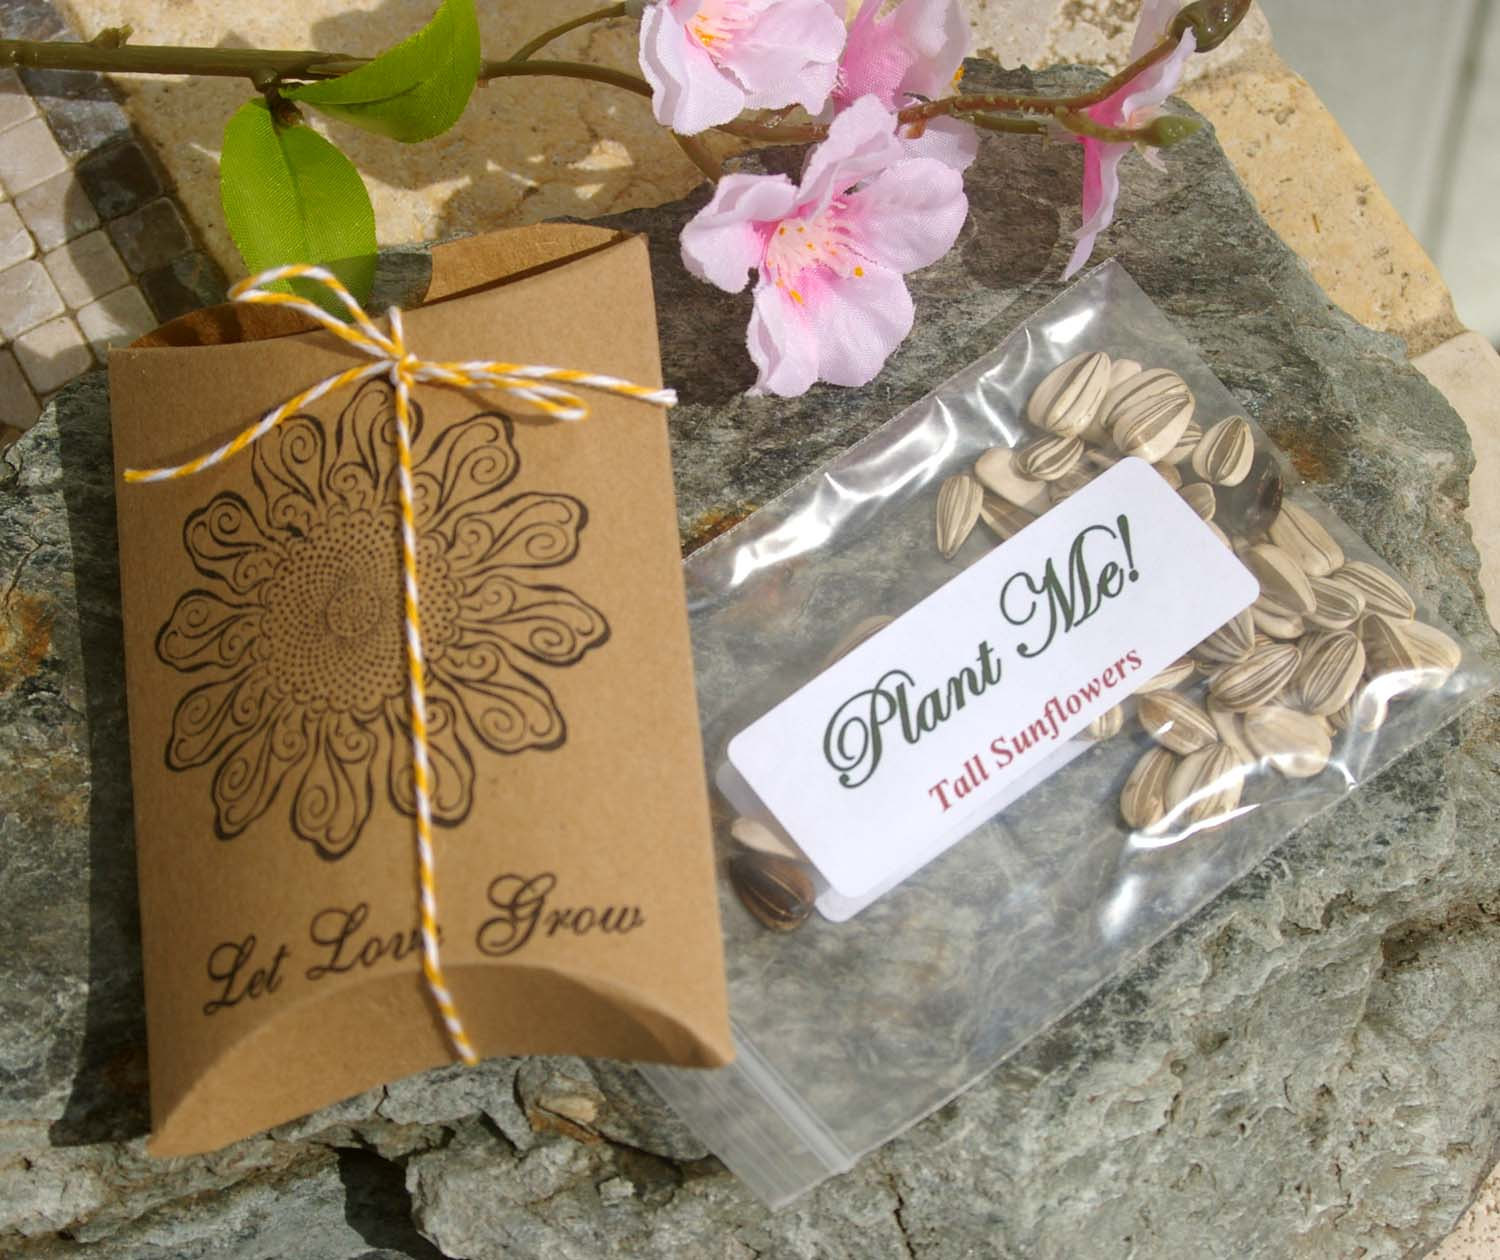 Flower Seeds For Wedding Favors
 Wedding Favors With Sunflower Seeds Let Love Grow by